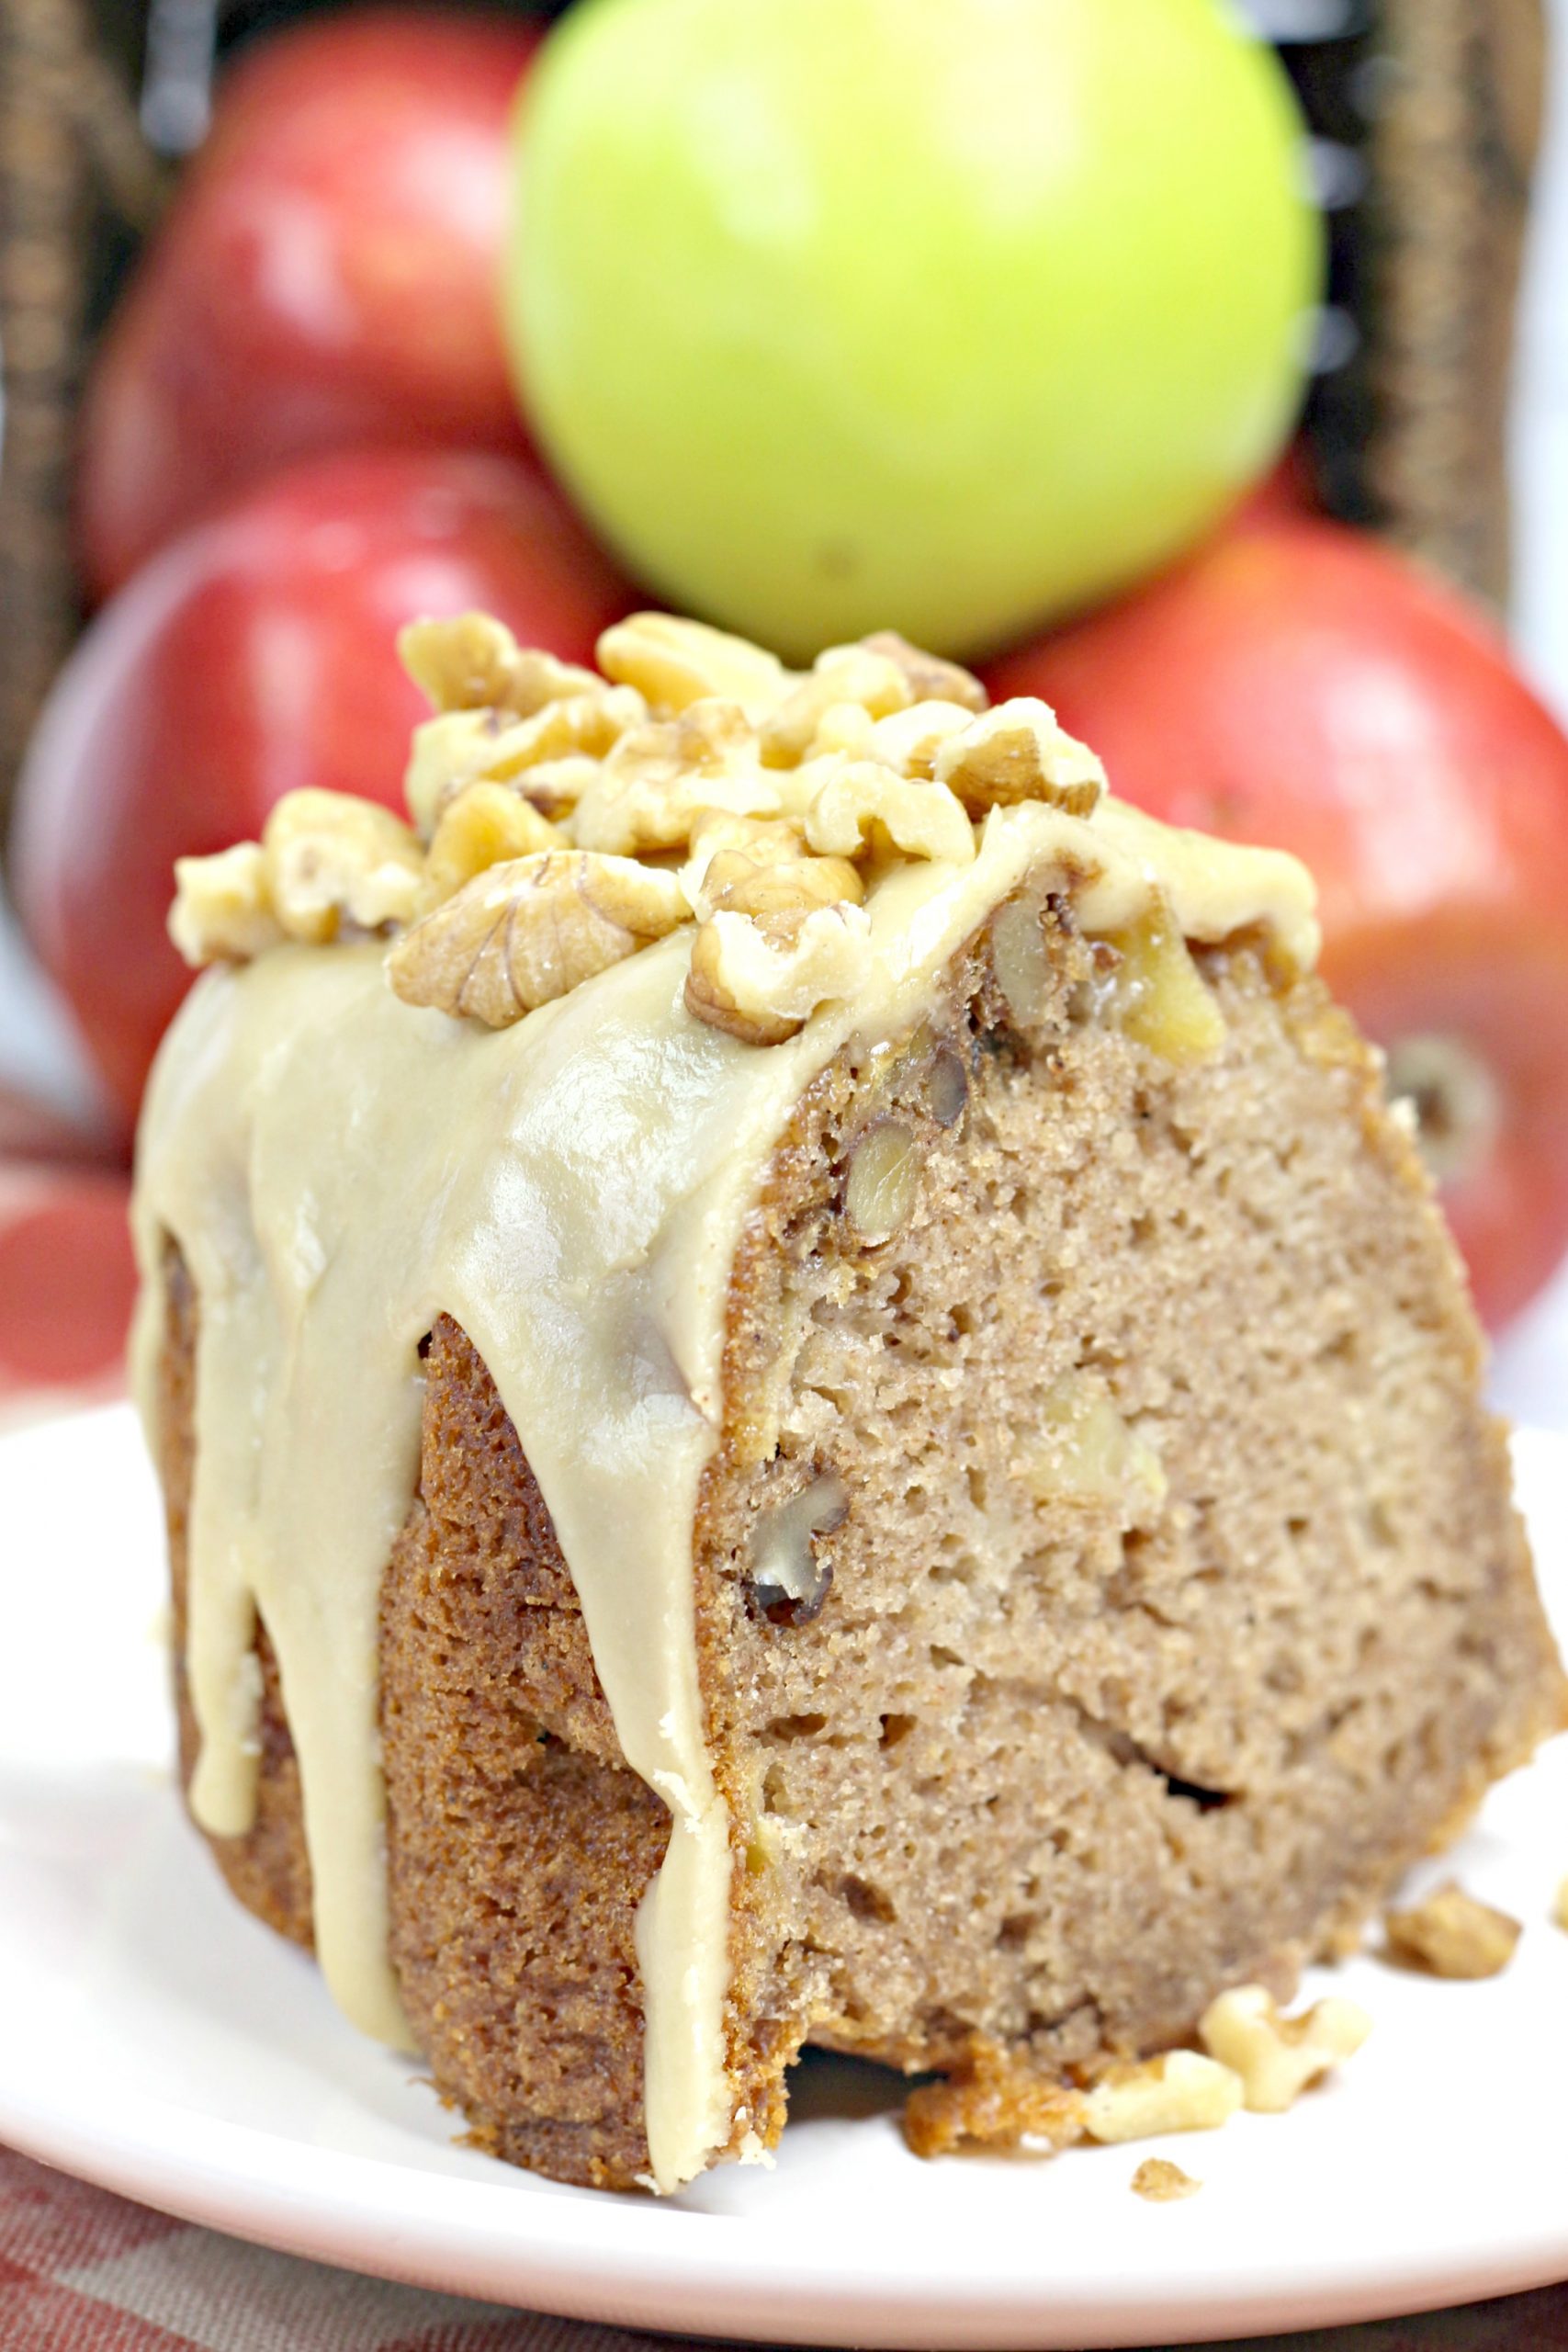 A slice of the caramel apple Bundt with apples behind it.